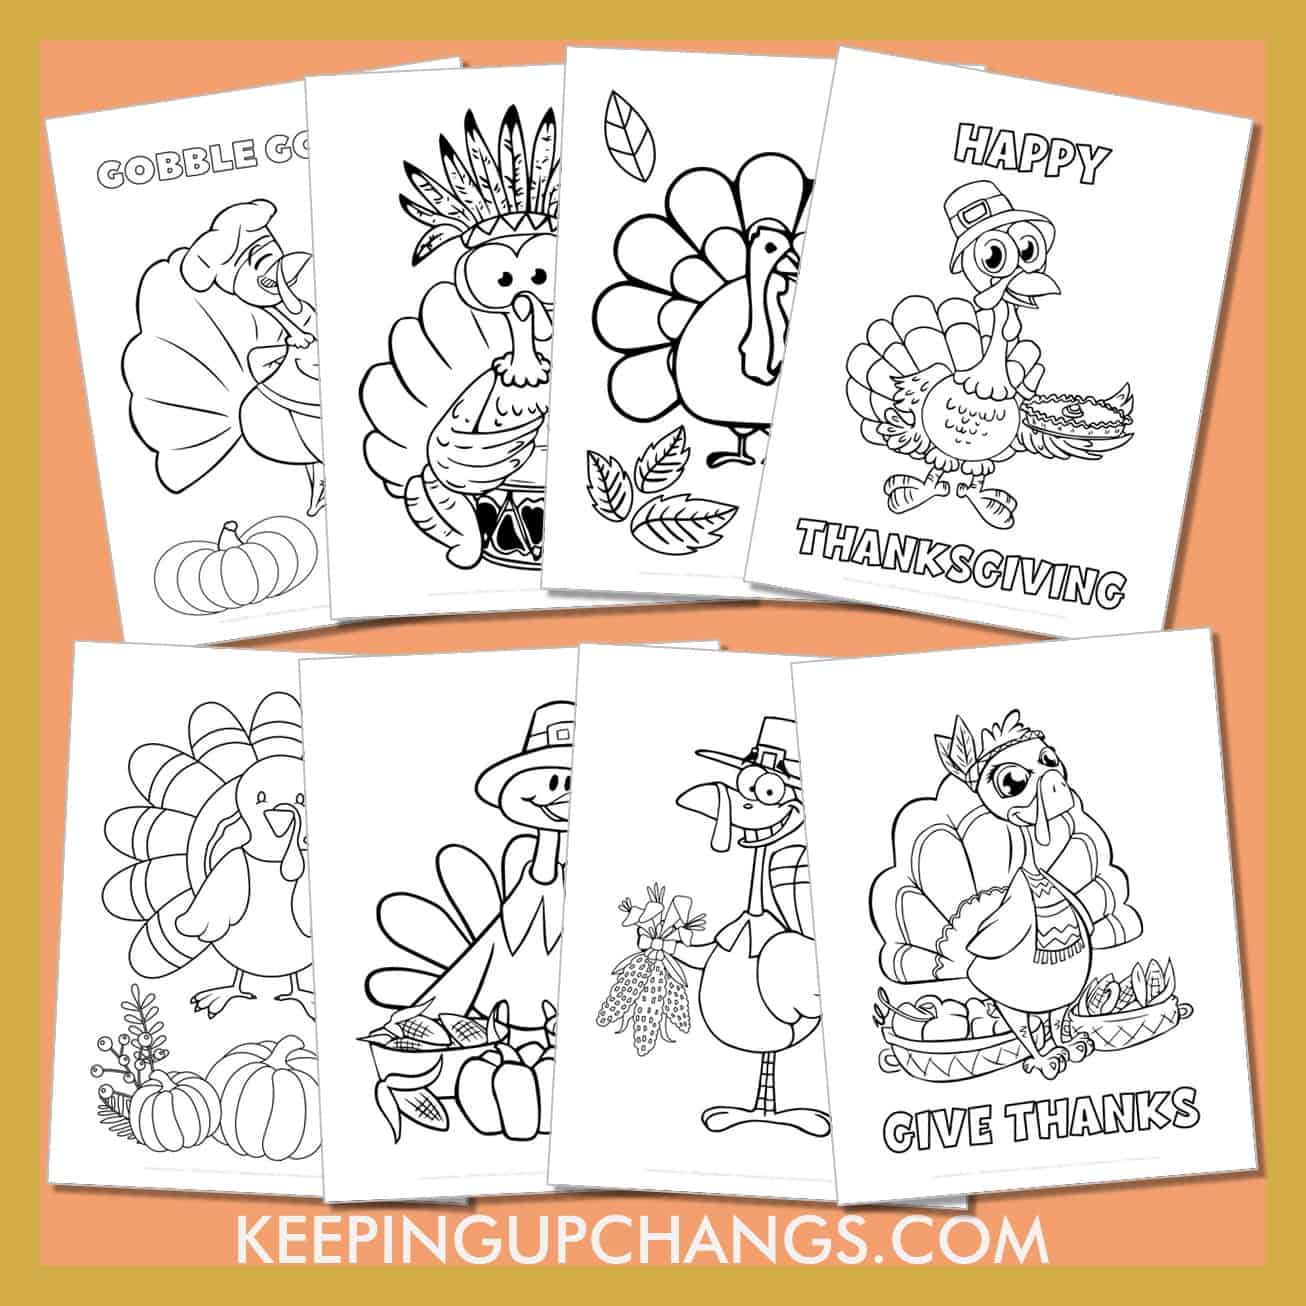 turkey colouring sheets including happy thanksgiving, pilgrim, indian, gobble gobble, pumpkins and more.